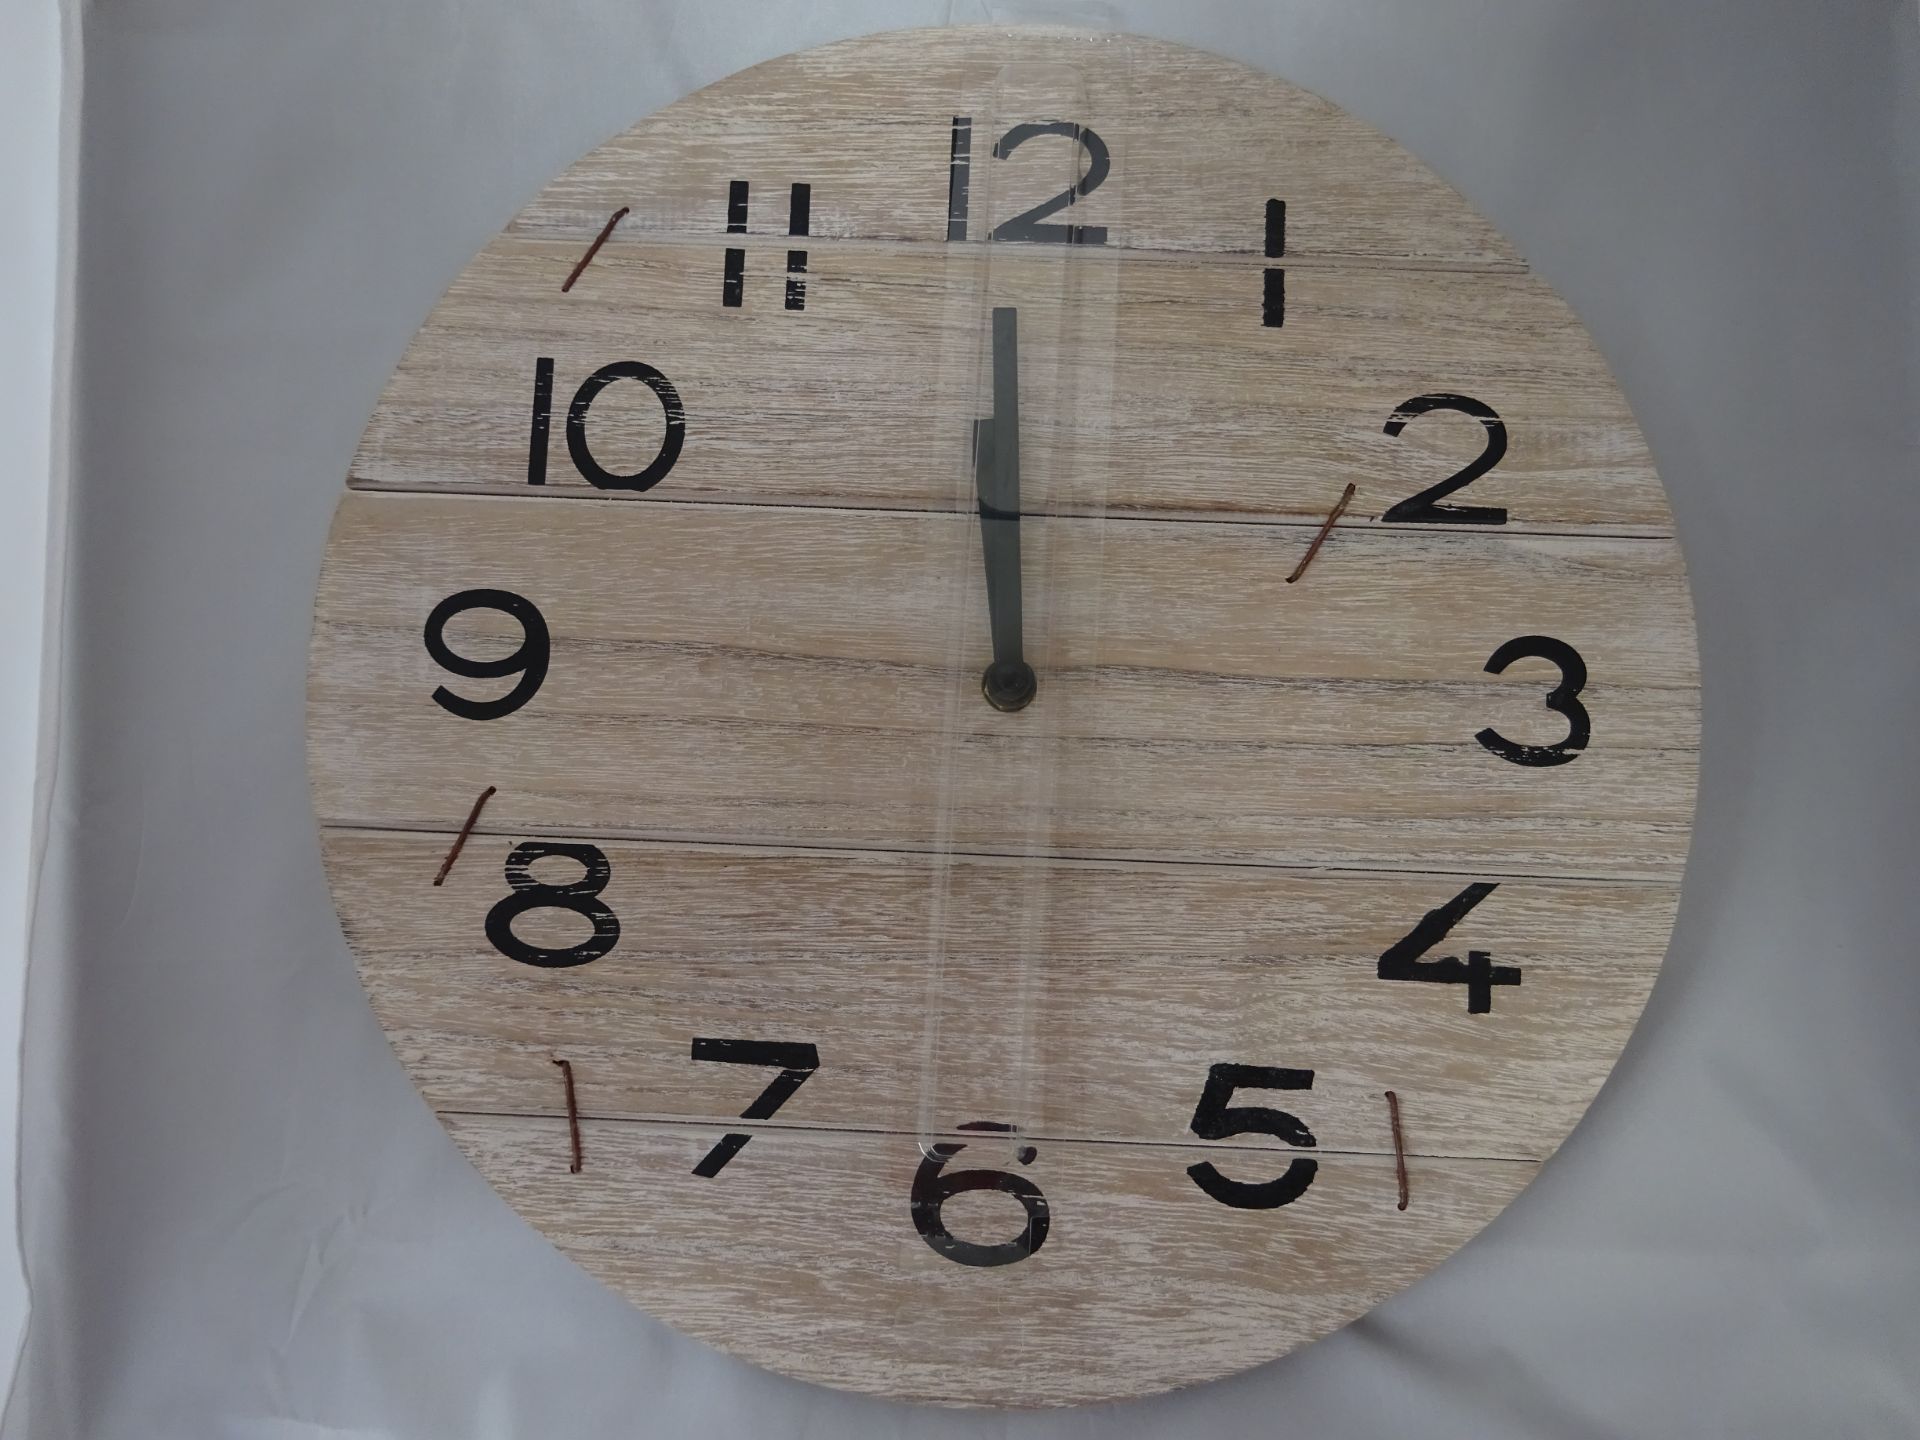 New WOODEN WHITE WASH WALL CLOCK in original box - Image 2 of 2